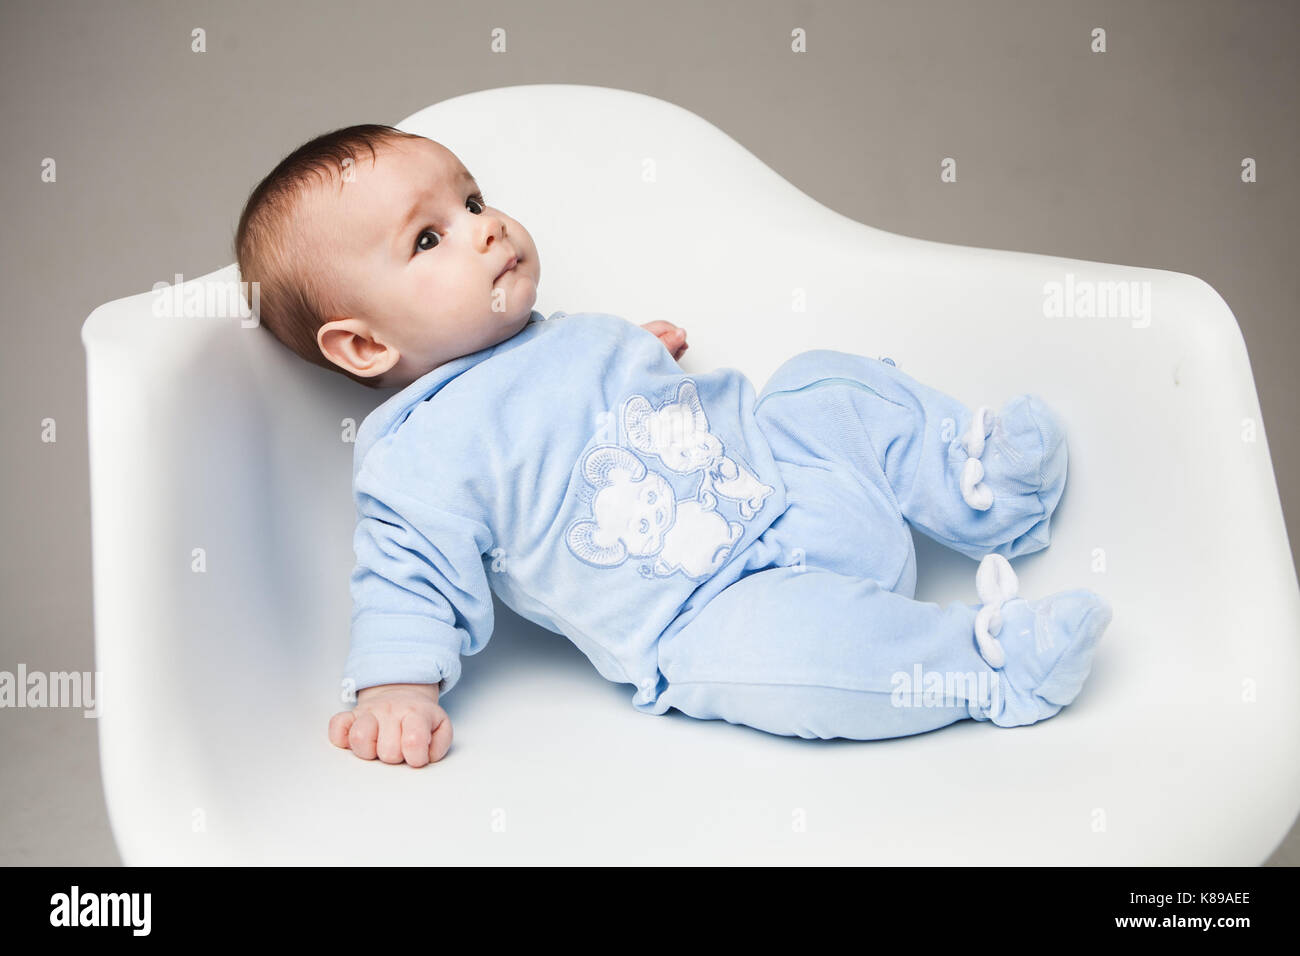 boy one year old sitting on chair studio portrait white background Stock Photo